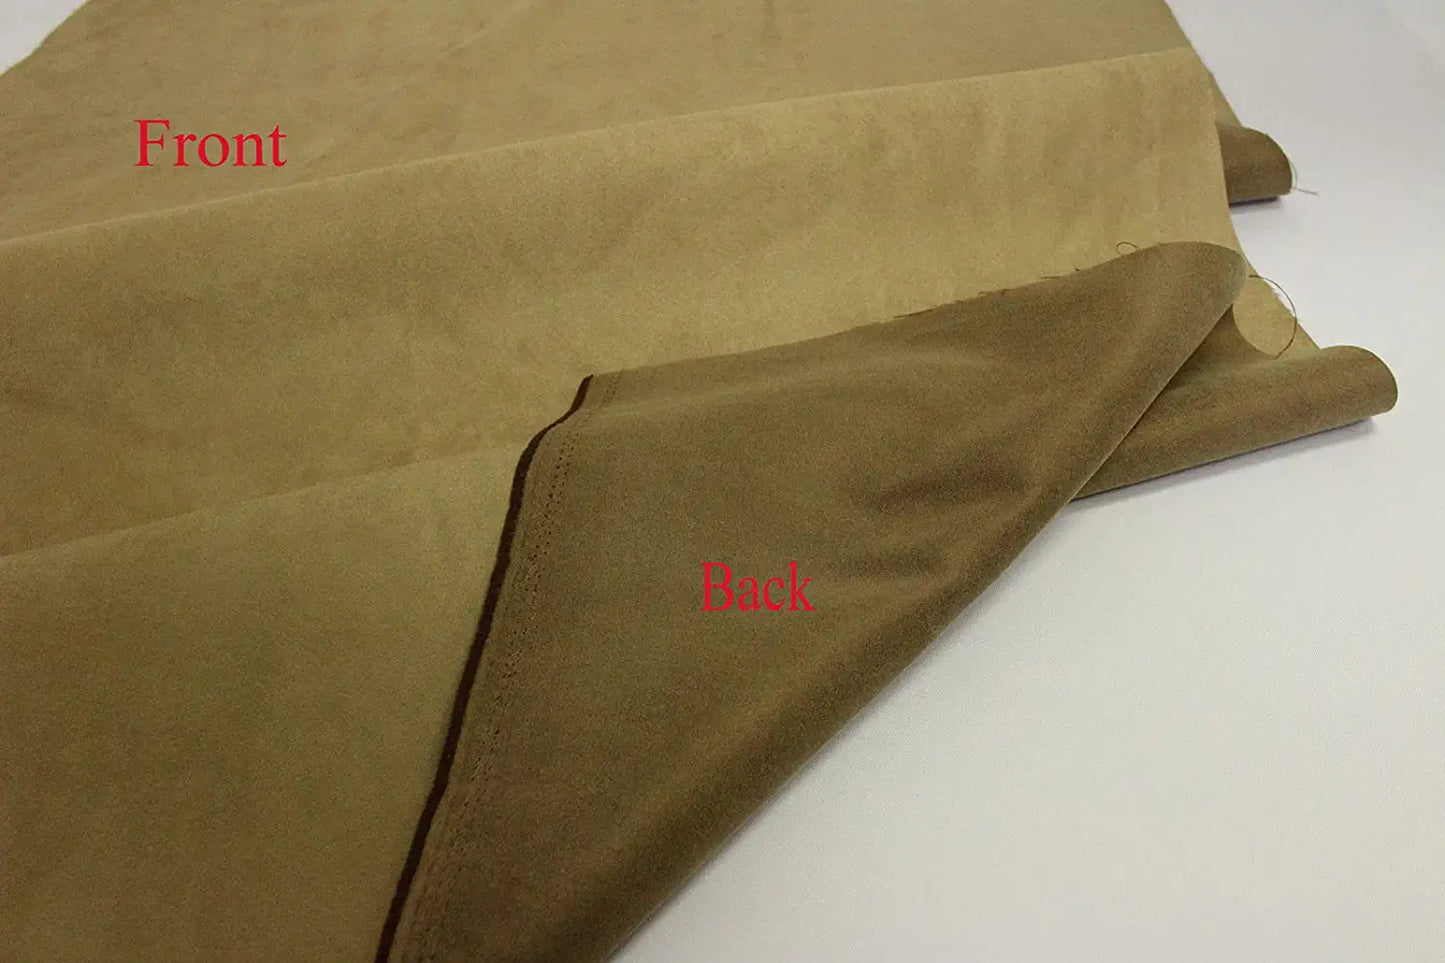 Camel Suede Microsuede Fabric Upholstery Drapery Fabric (1 Yard)